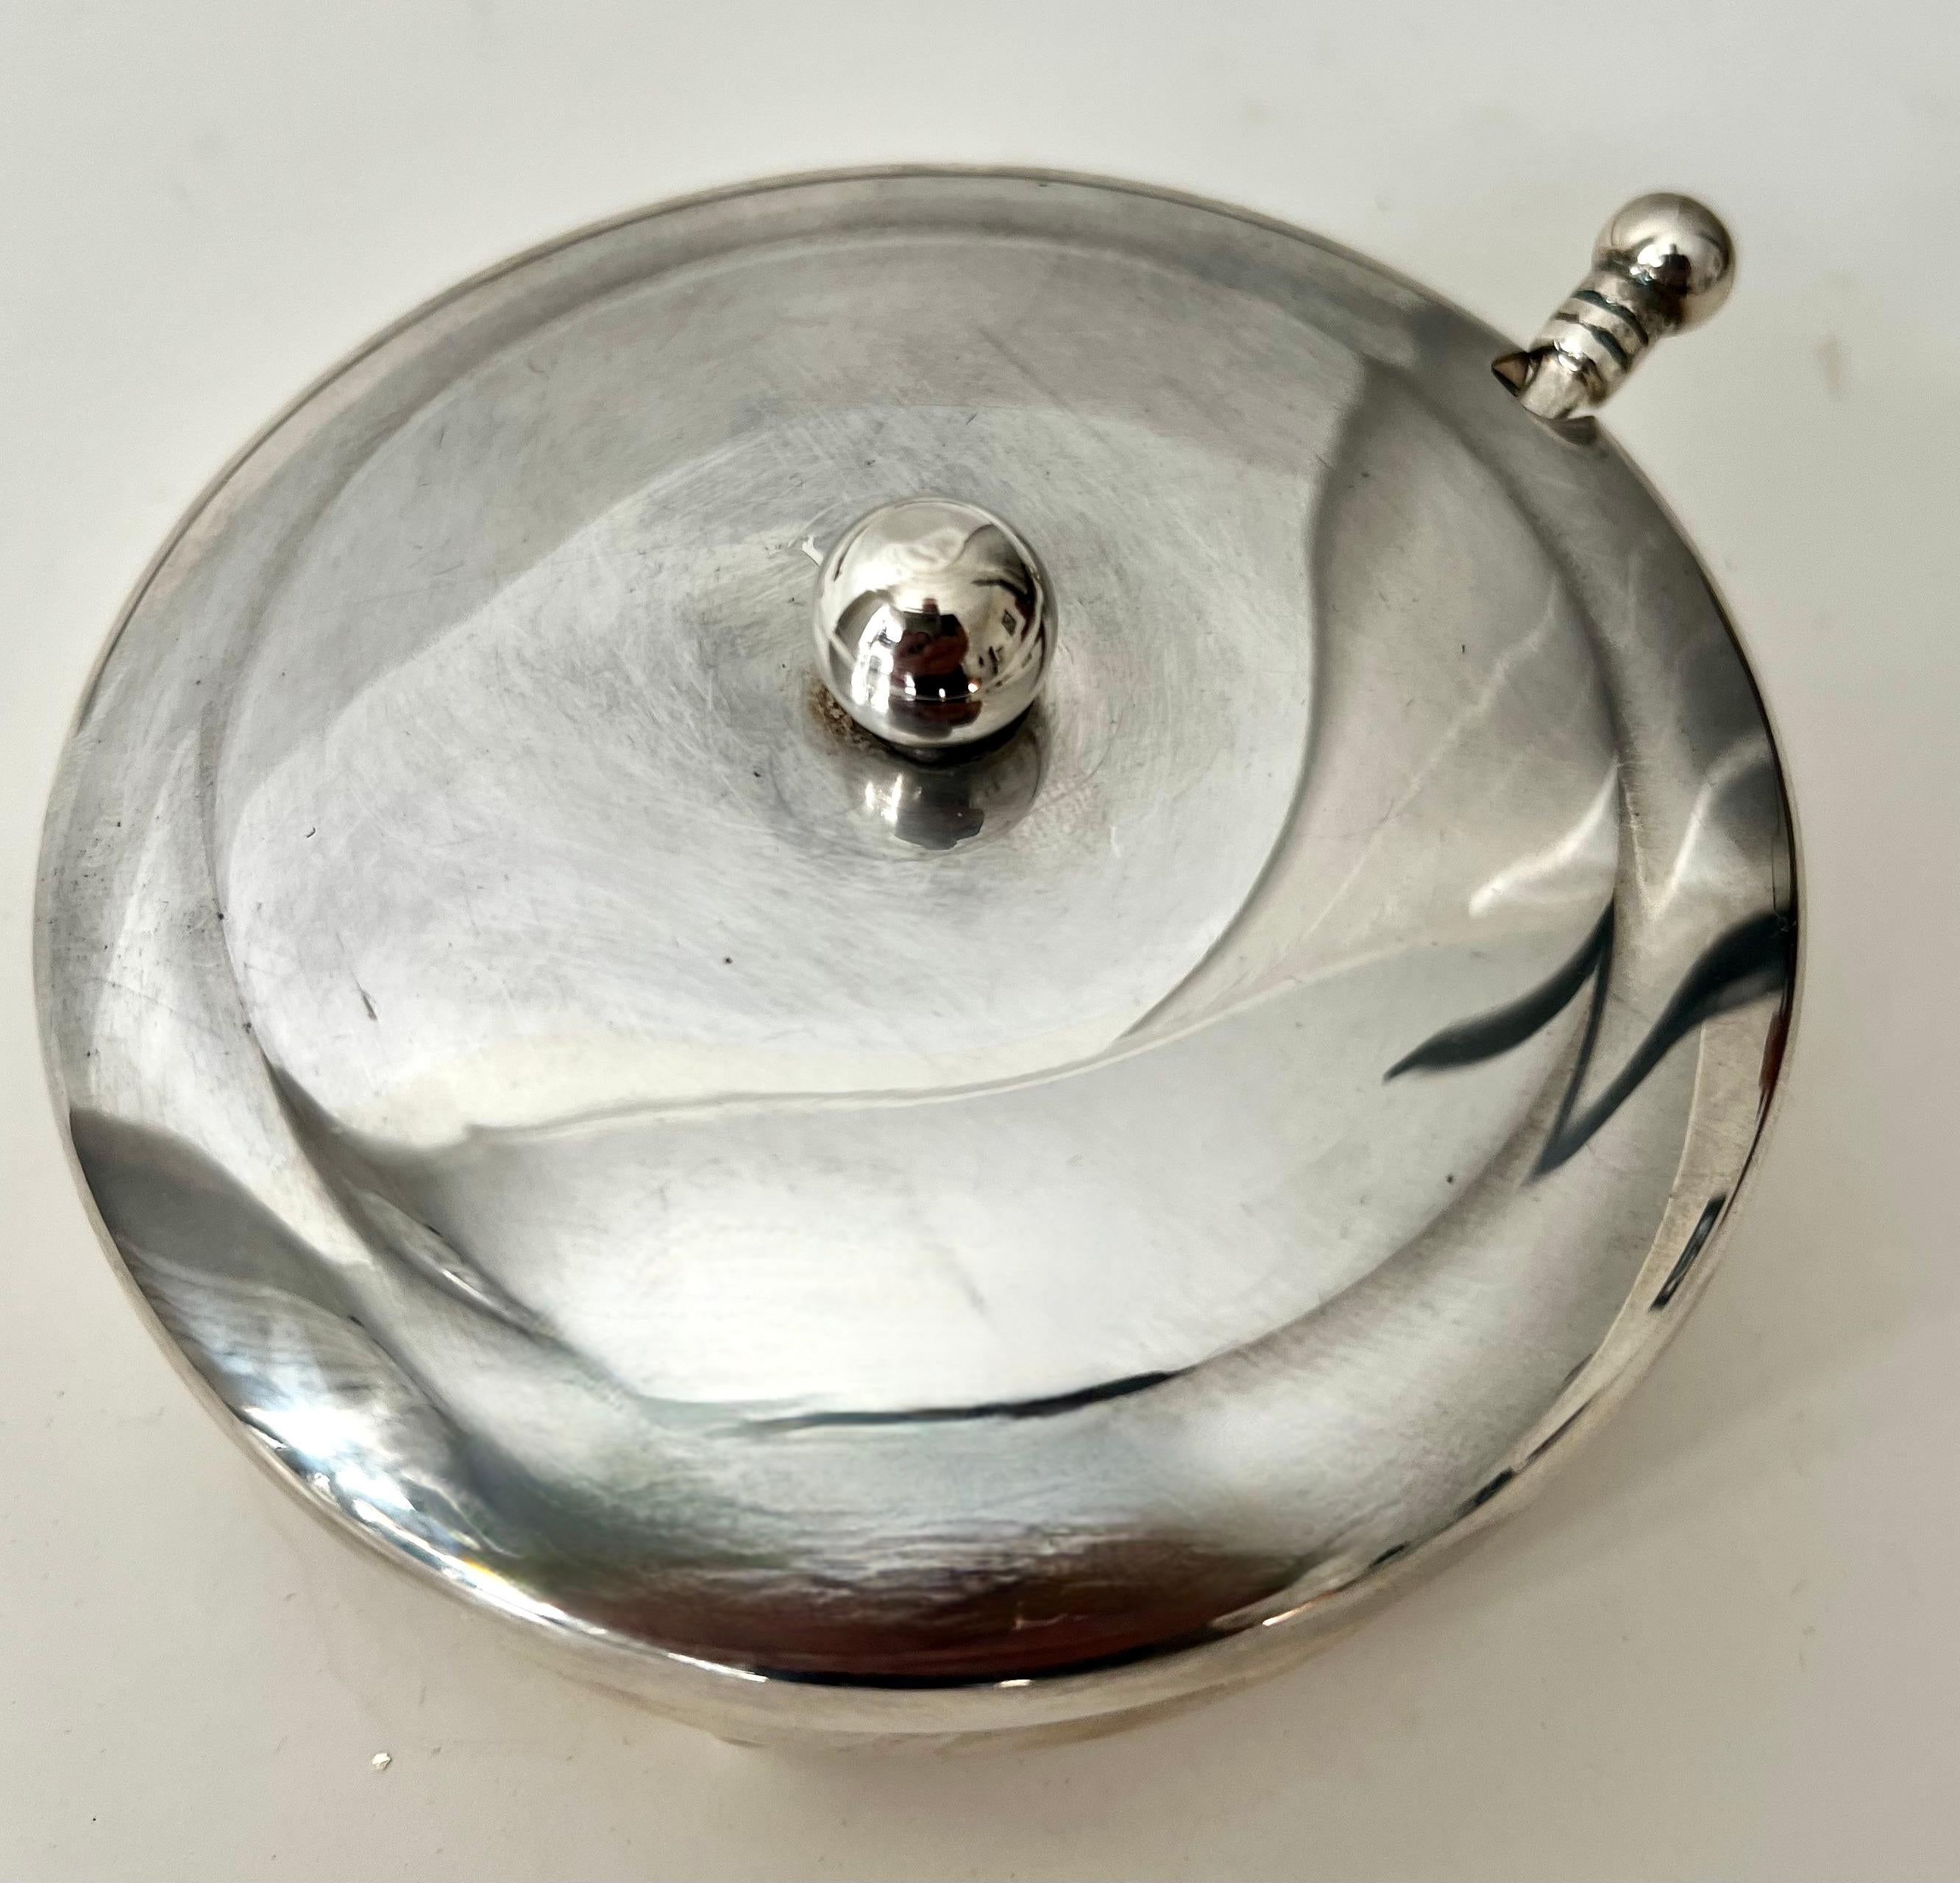 A simple, yet sophisticated Sugar or Condiment bowl with spoon.  The piece is very elegant and when polished, a true winner. 

A lovely addition to your breakfast table or use at the bar as well.